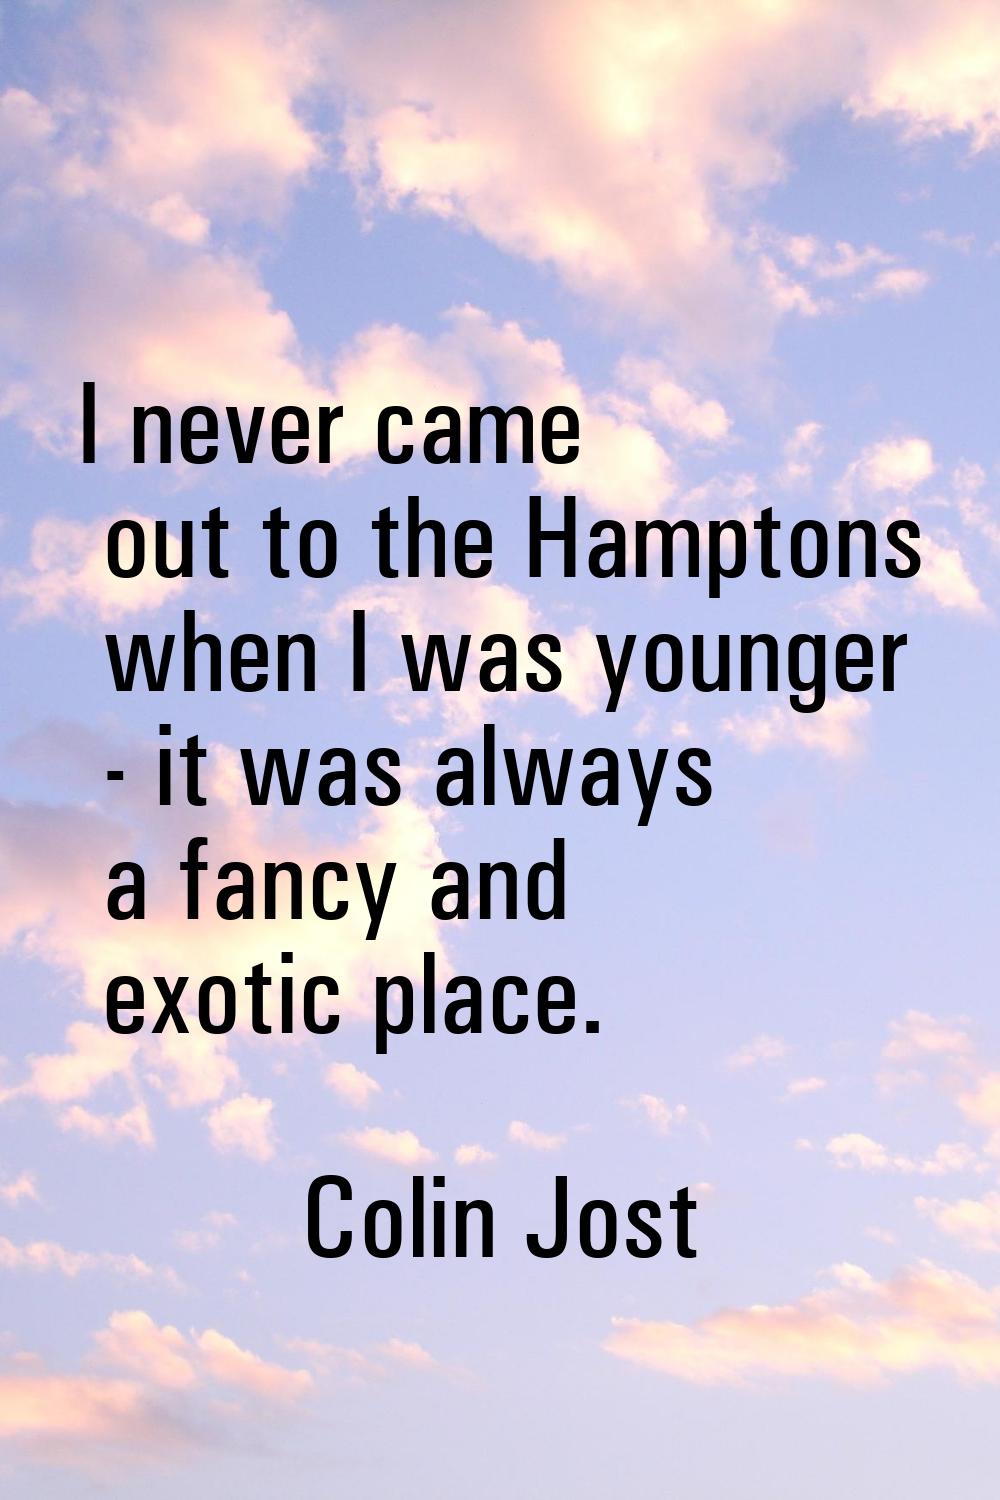 I never came out to the Hamptons when I was younger - it was always a fancy and exotic place.